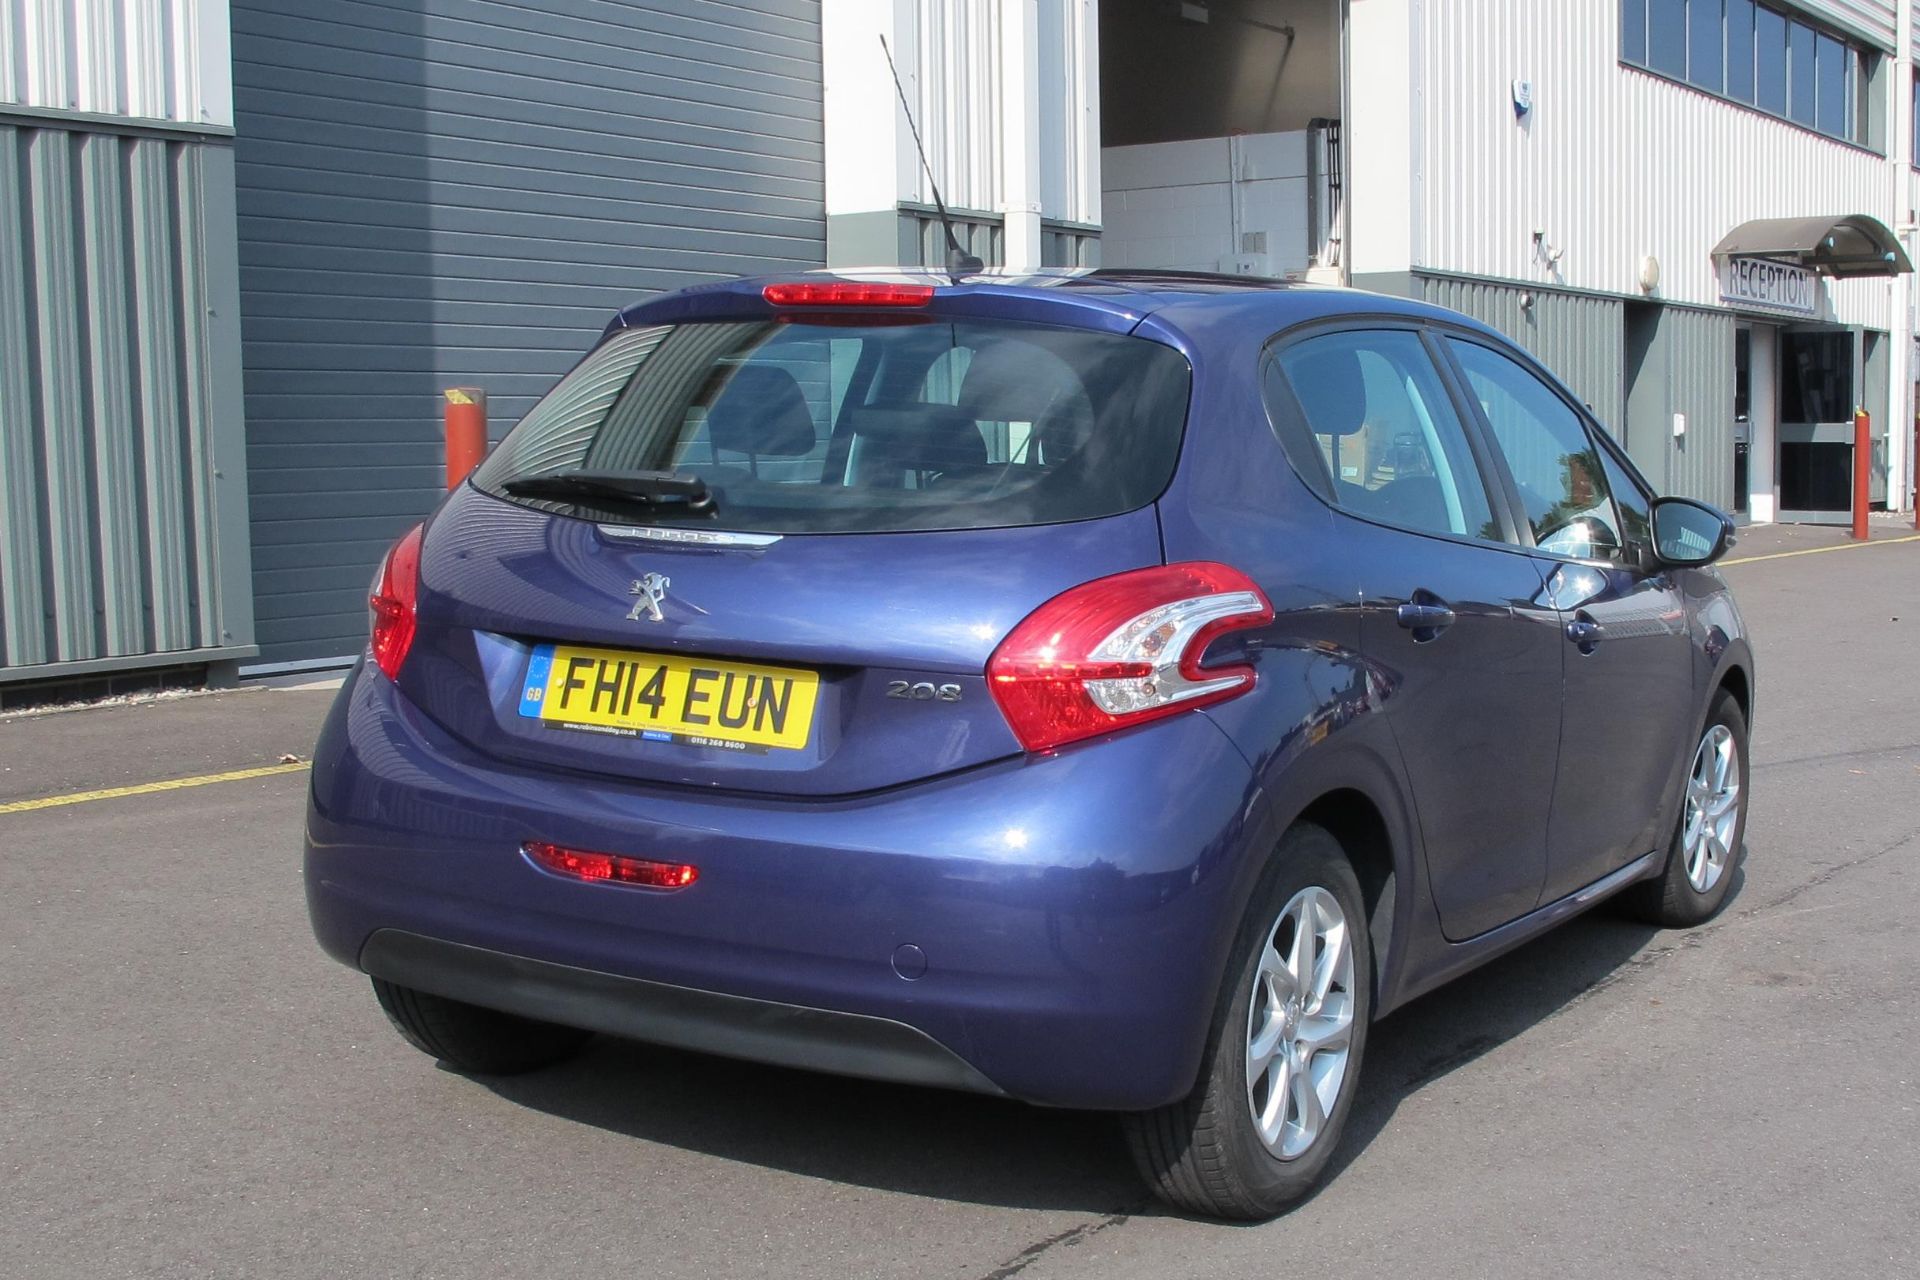 Peugeot 208 Active HDI 5 door hatch. 1398cc. Full service history, Registration FH14 EUN. Odometer - Image 2 of 18